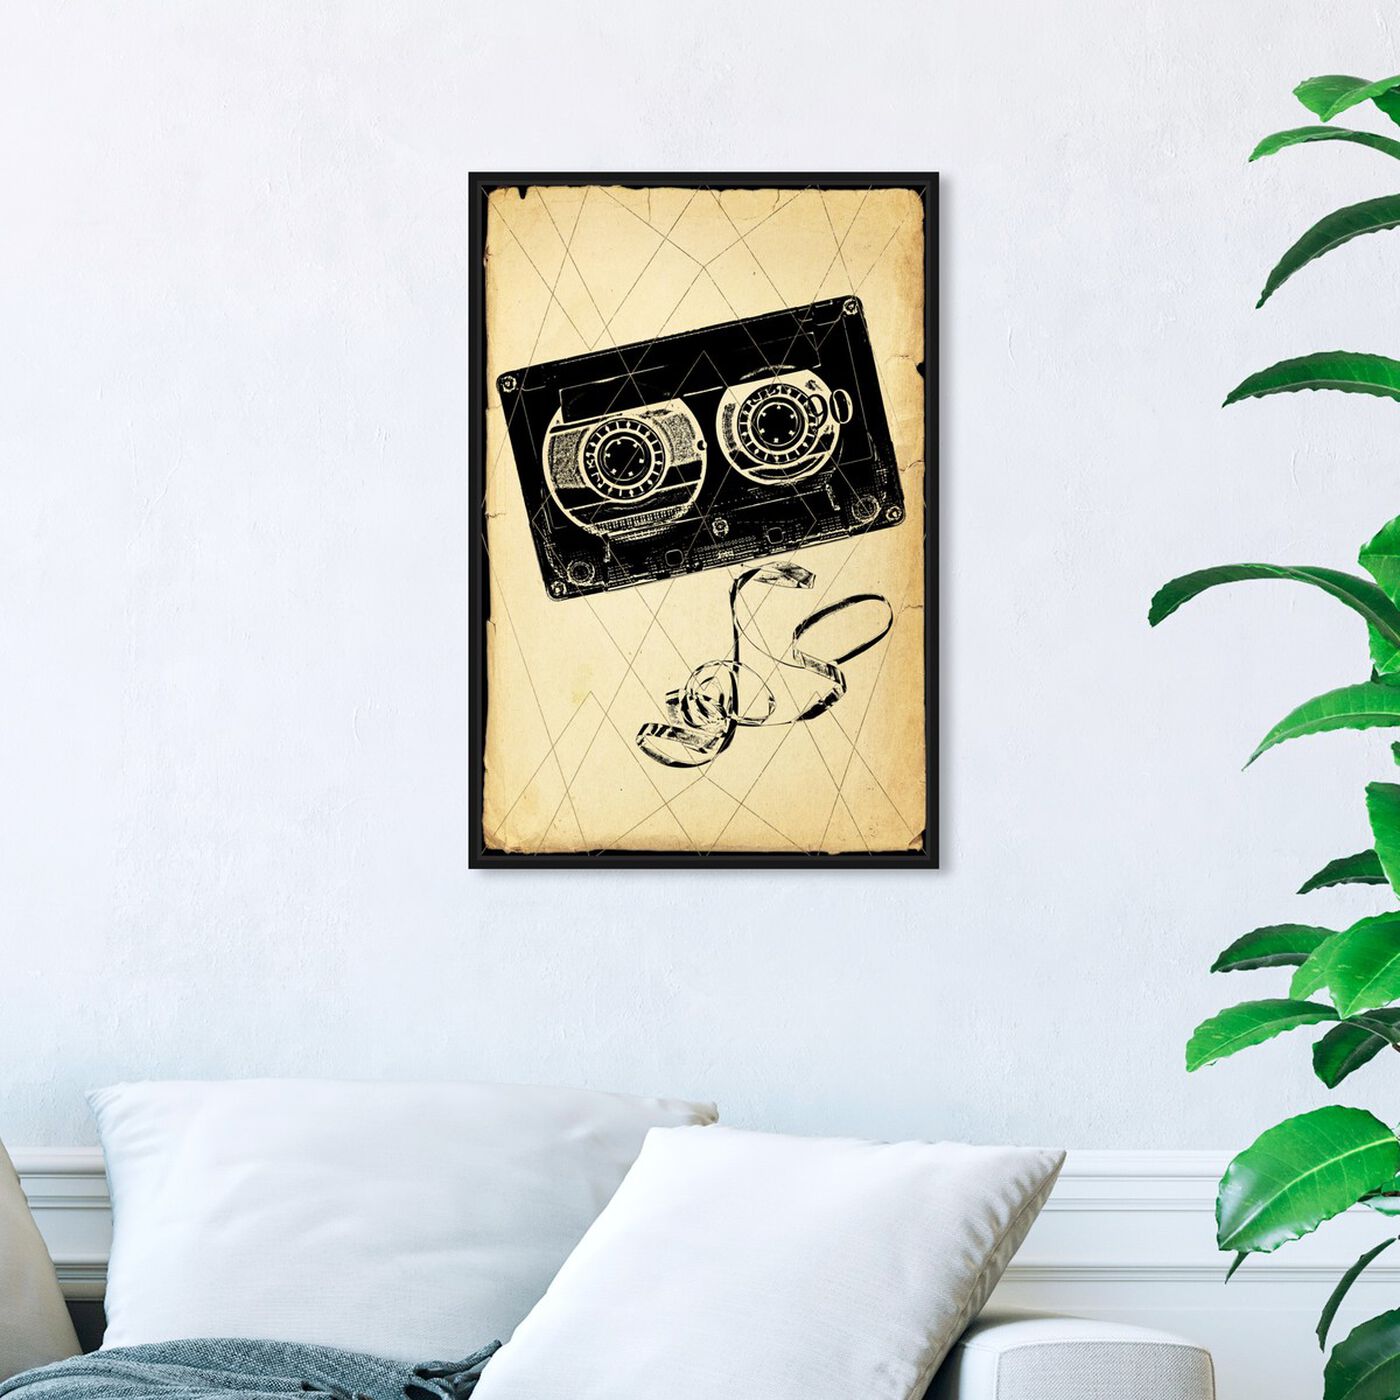 Hanging view of Cassette Tape Print featuring music and dance and dj art.